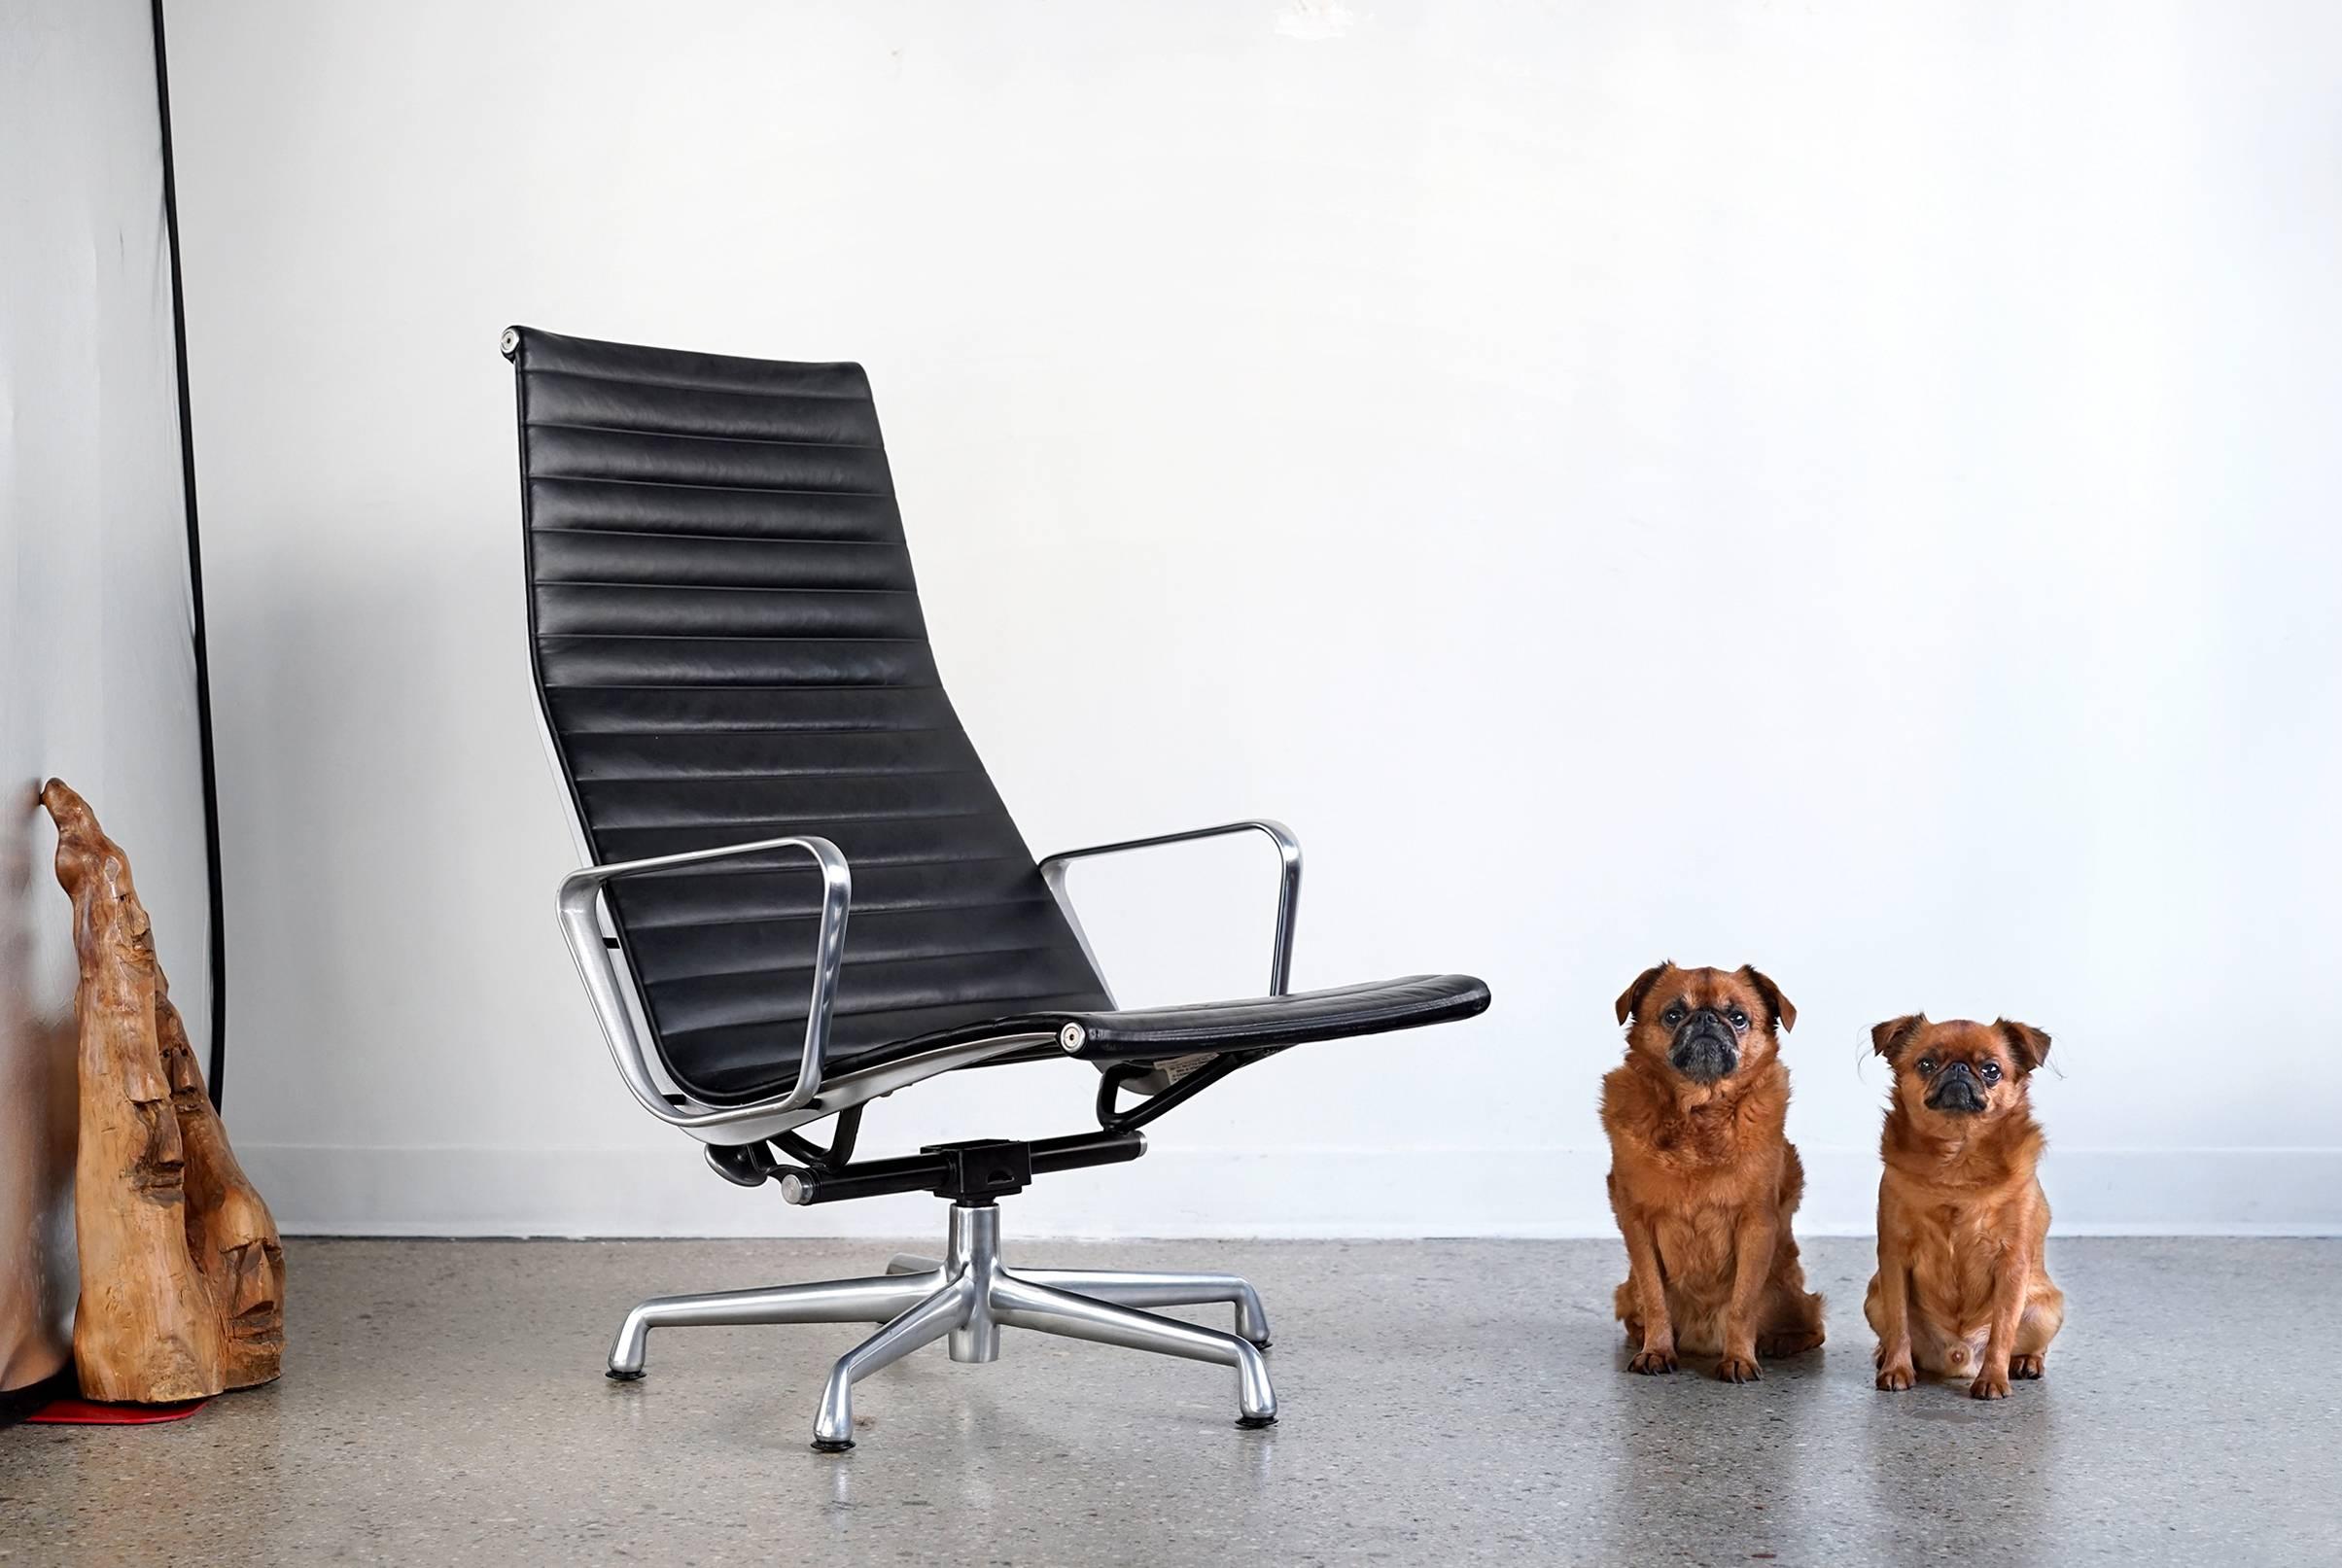 We have here a fine example of Eames' Aluminum group chair featuring black, leather upholstery, high back, and five star base with original black, plastic feet. Classic, handsome, and exceptionally comfortable. The attached headrest flips back and